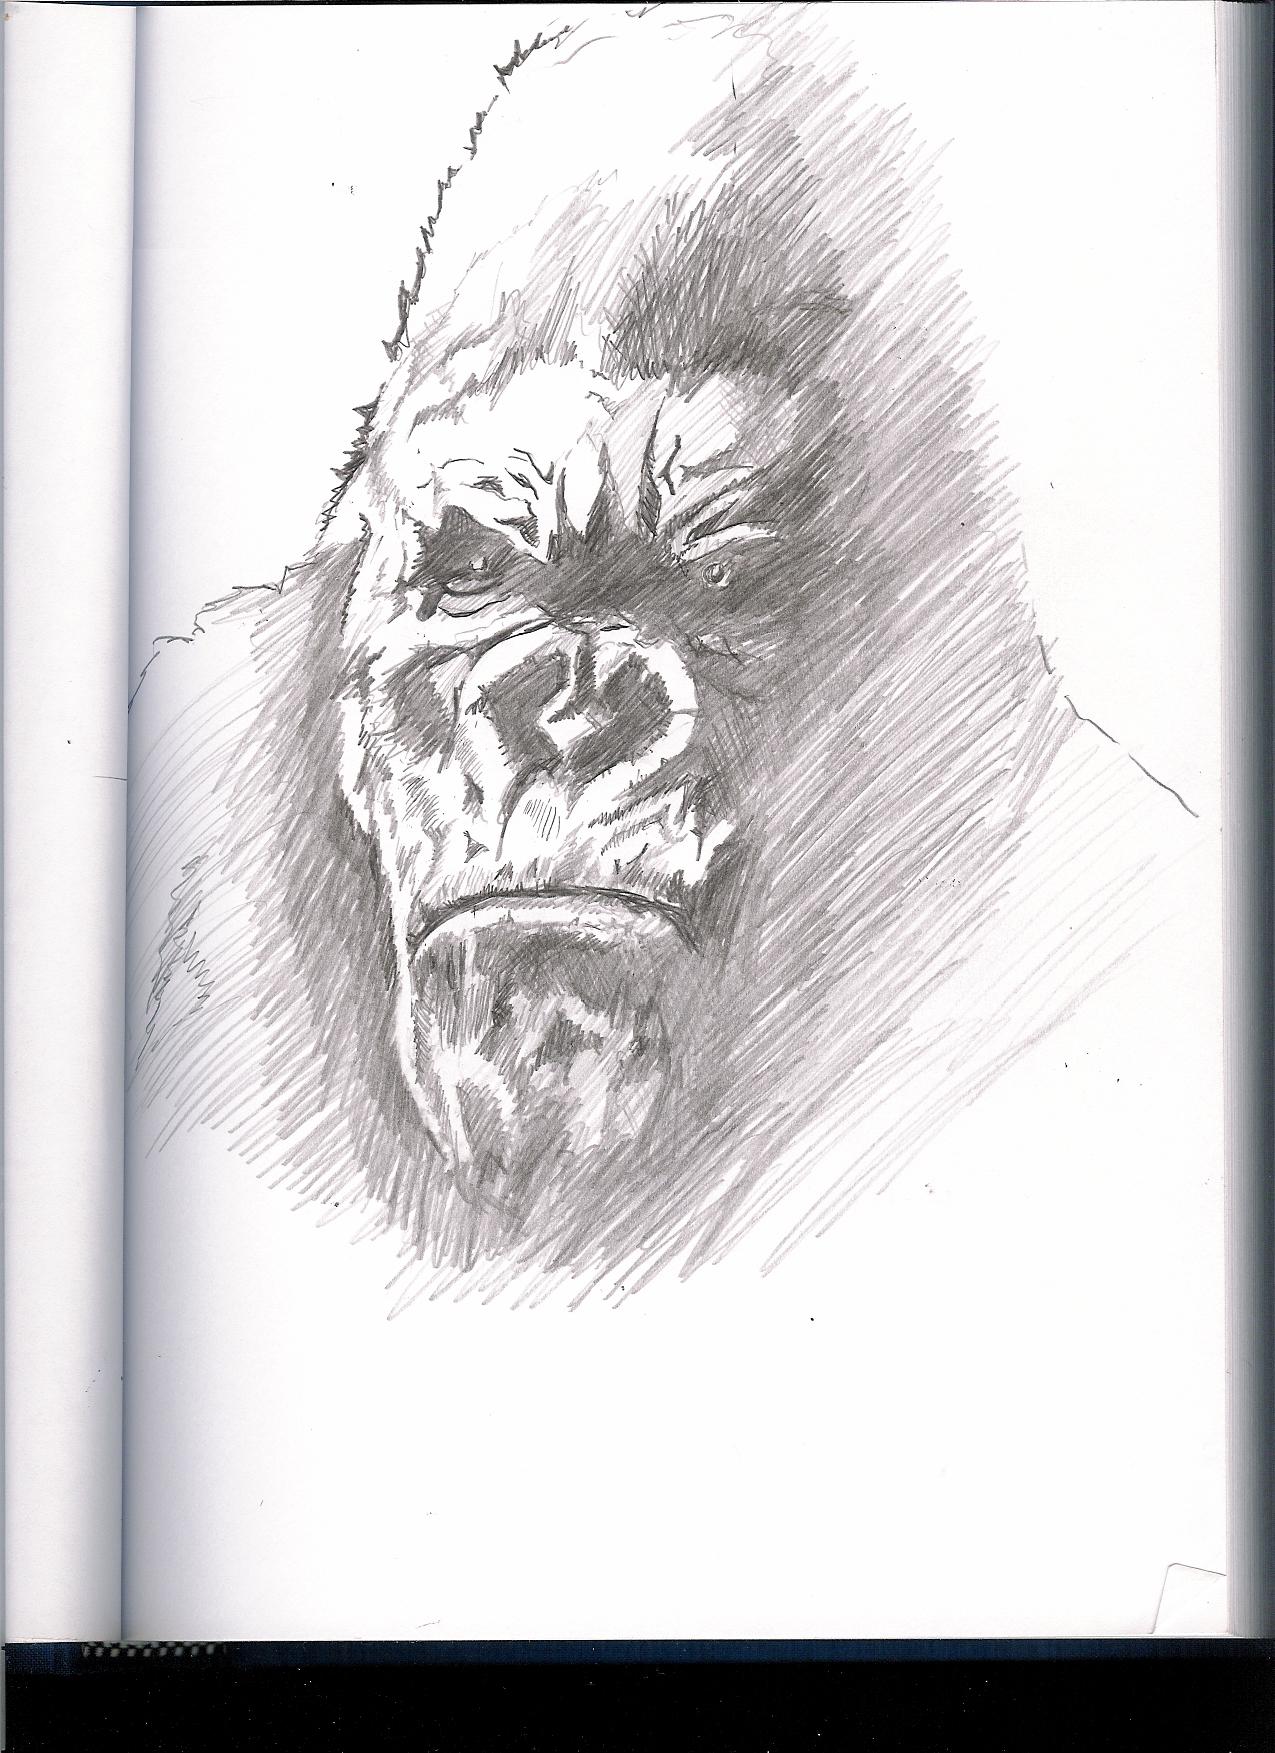 portrait of Kong by diggs421